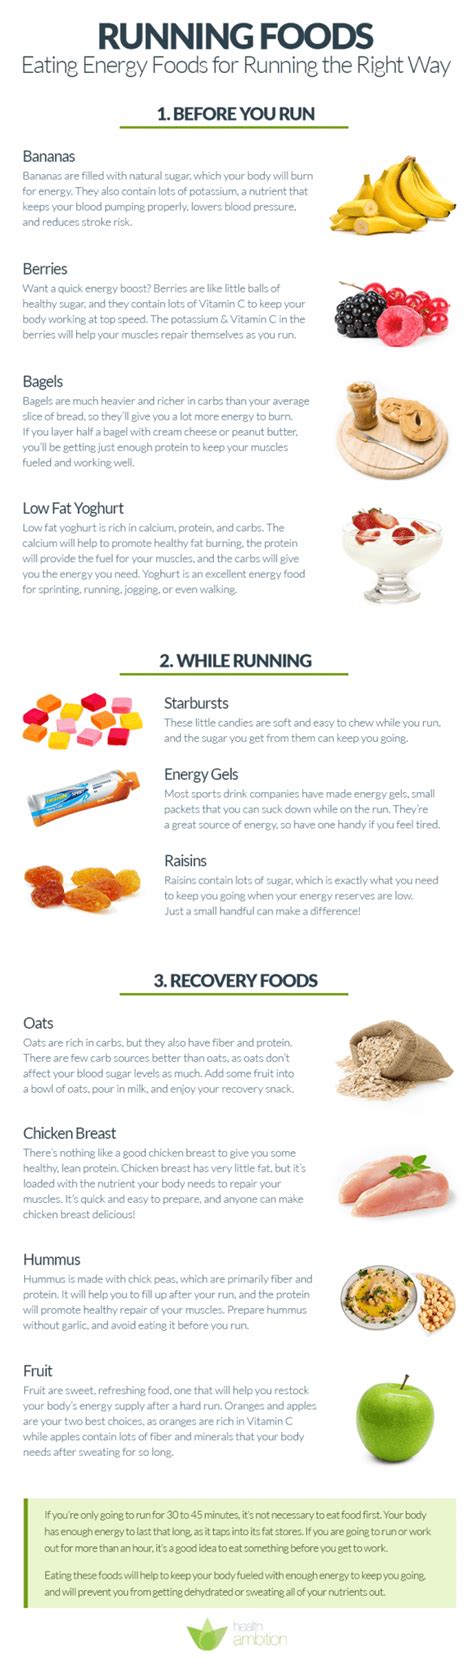 Mint does not only boost fat burning, but it also gives you more energy. Running Foods - Eating Energy Foods for Running the Right ...